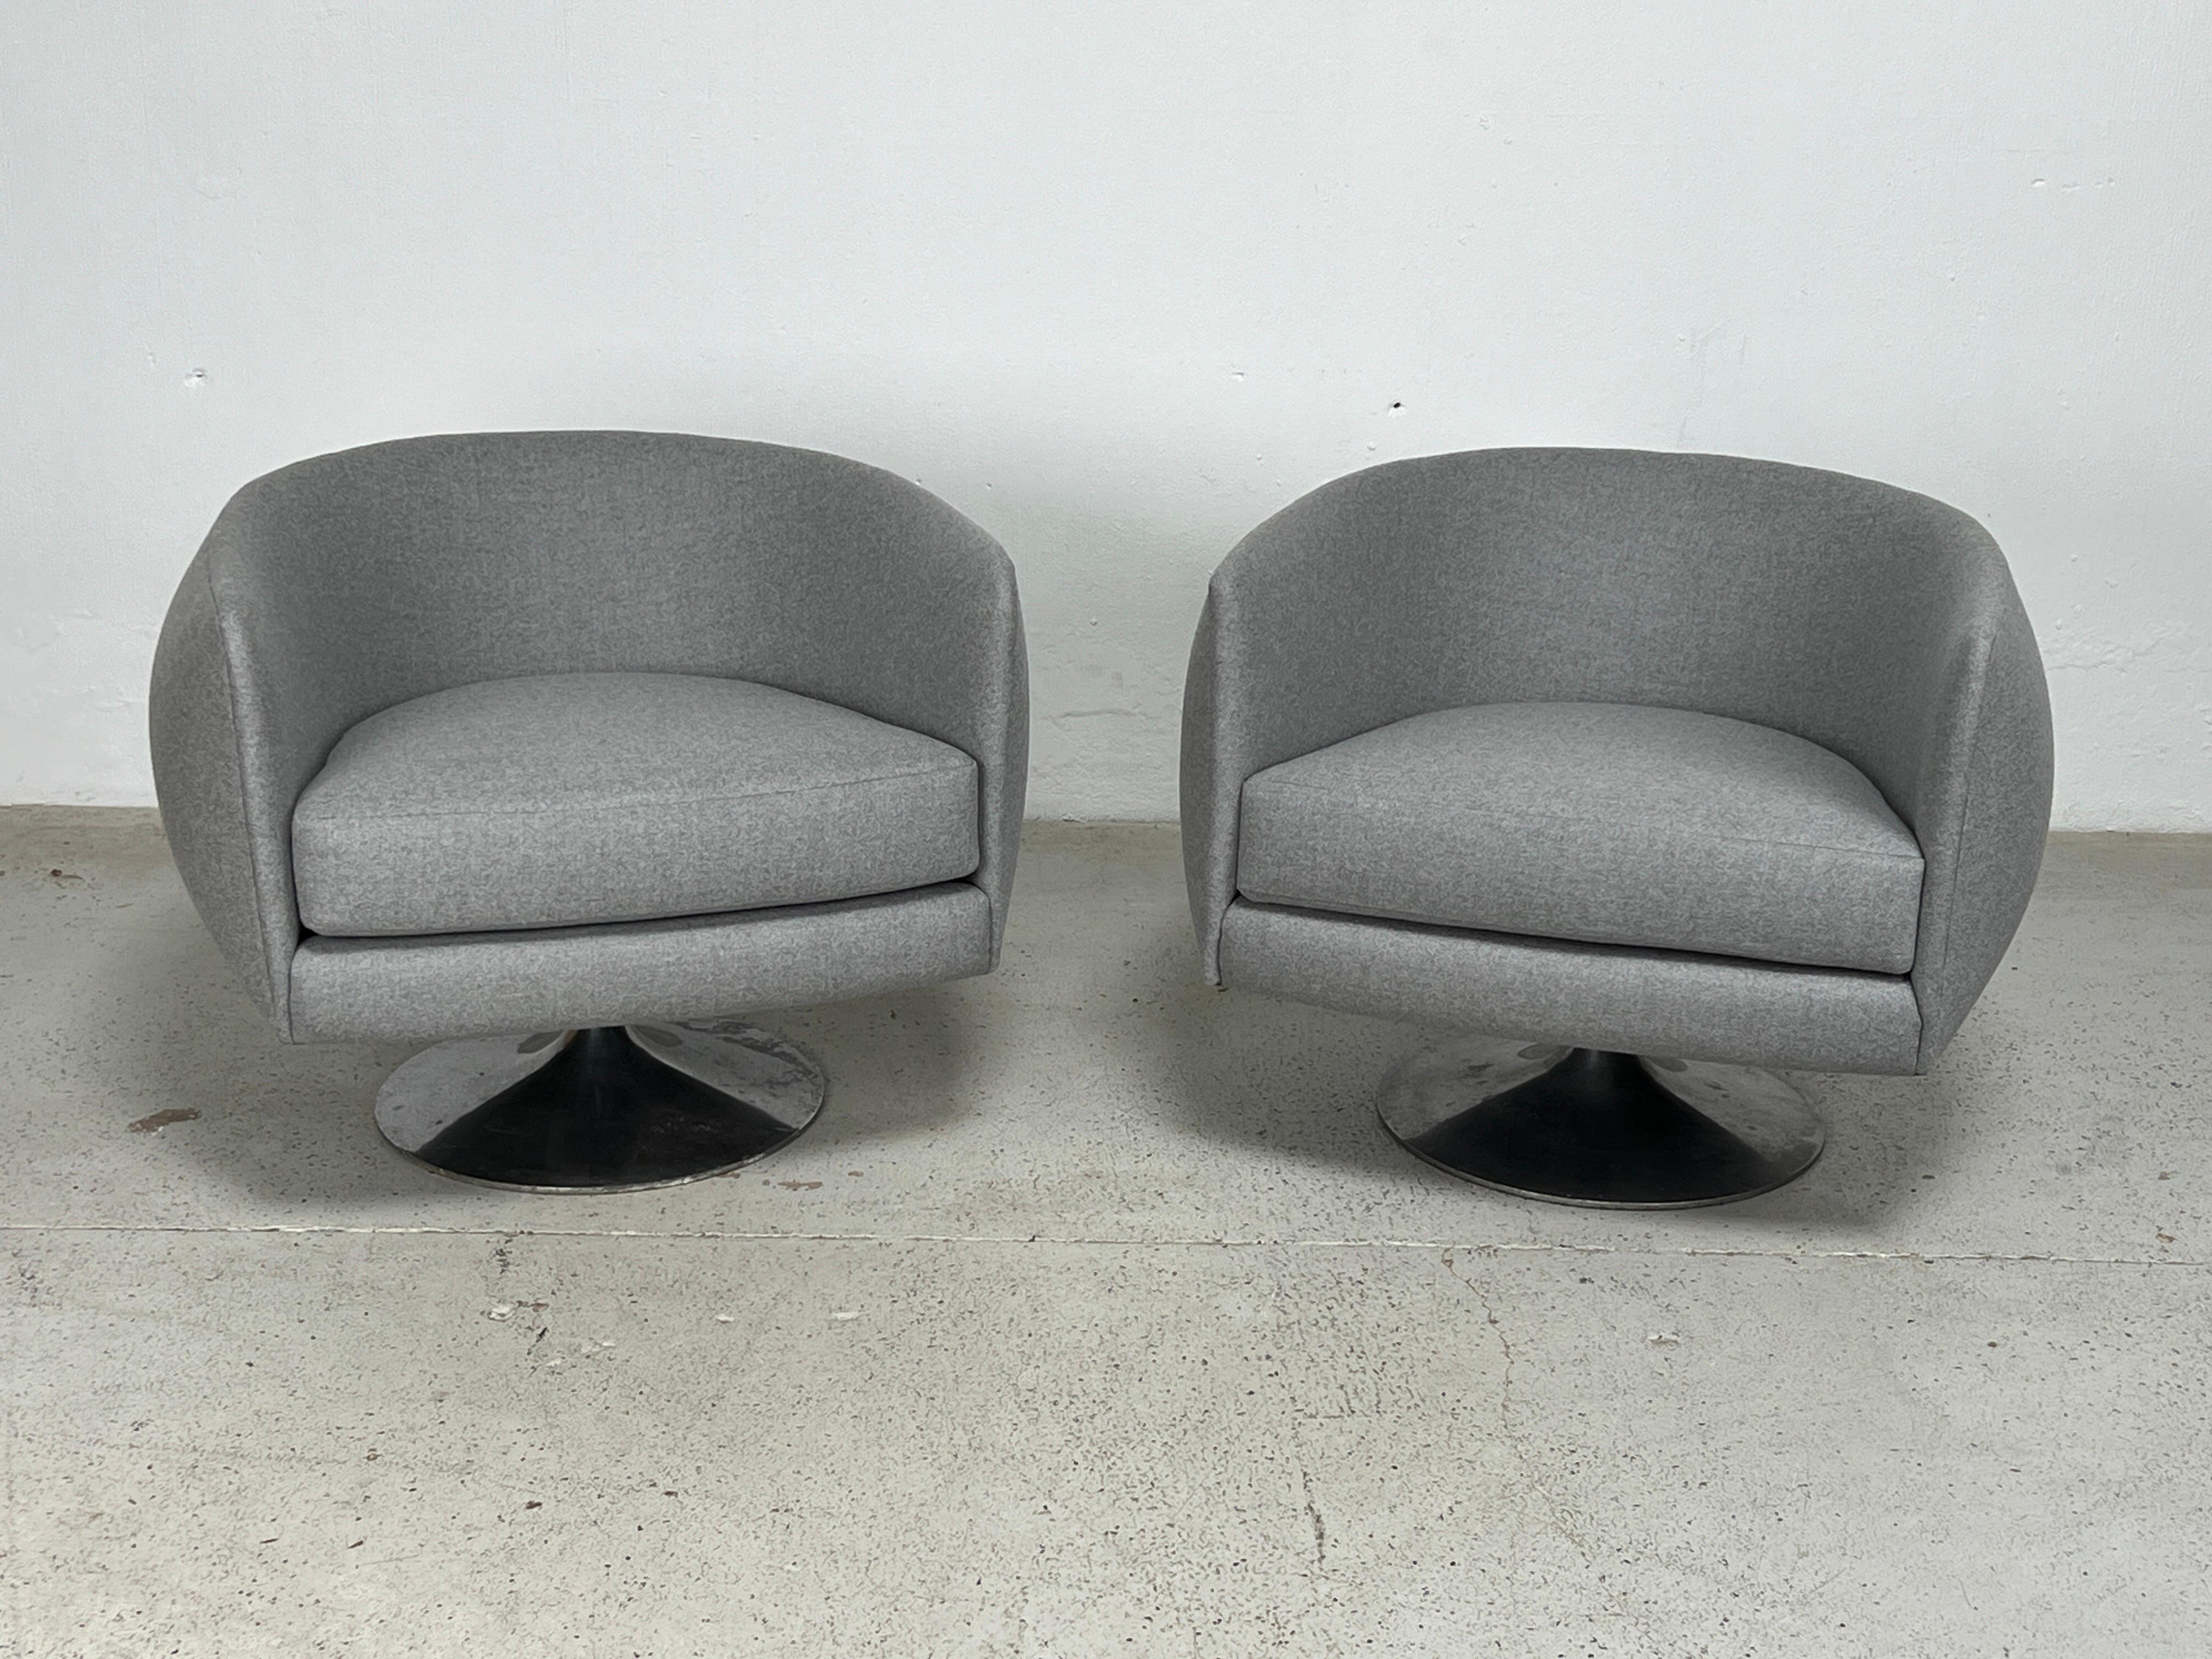 A pair of tulip base swivel chairs designed by Adrian Pearsall for Craft associates. Fully restored and upholstered in a grey wool felt.